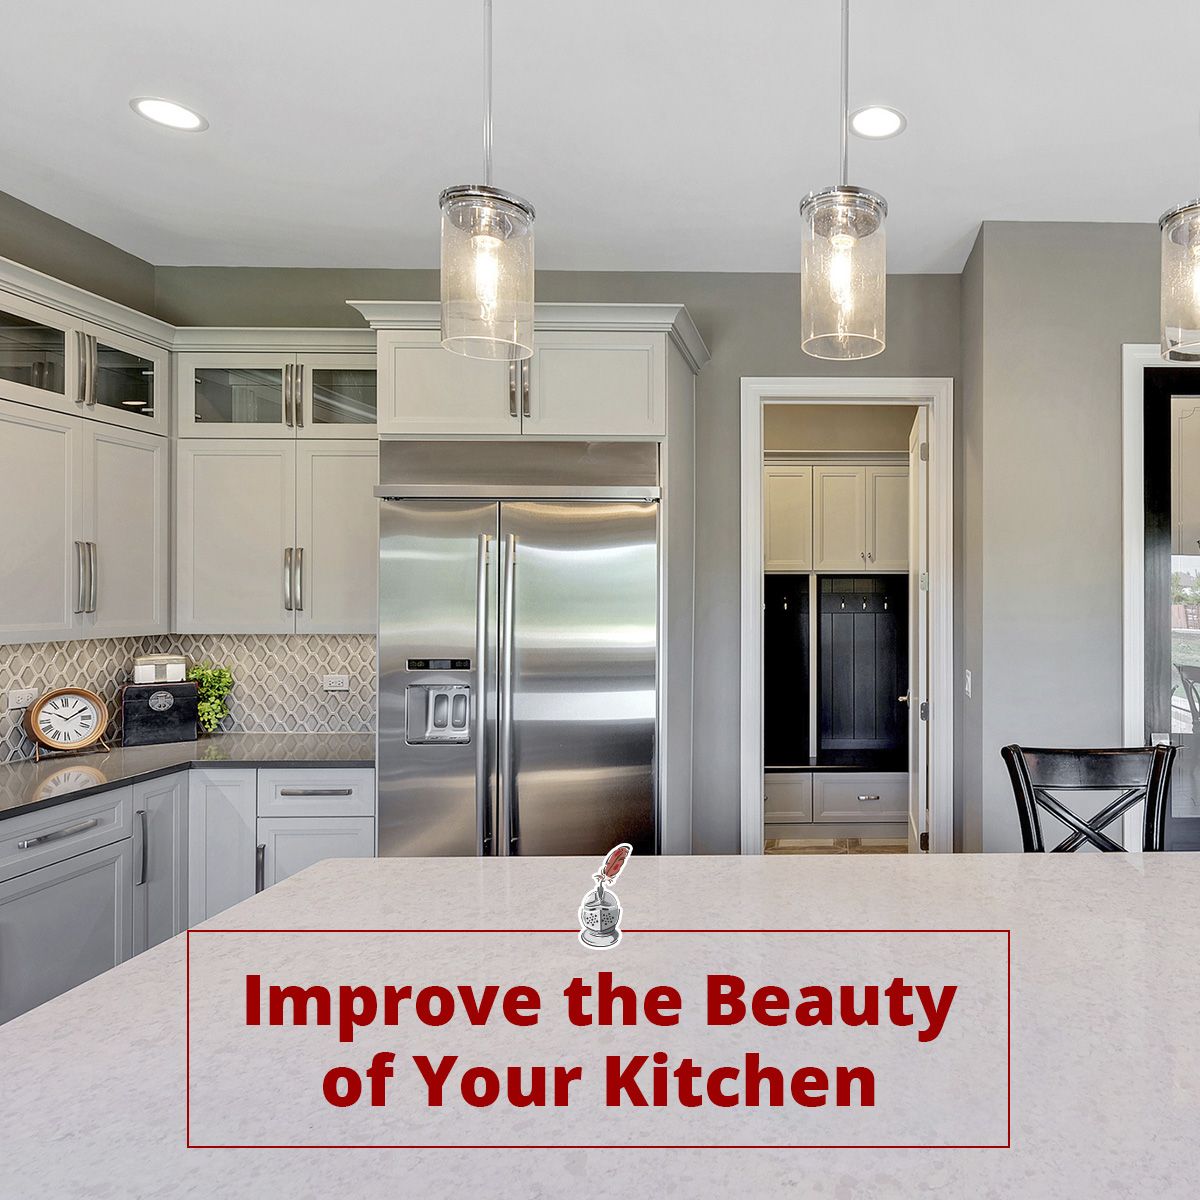 Improve the Beauty of Your Kitchen